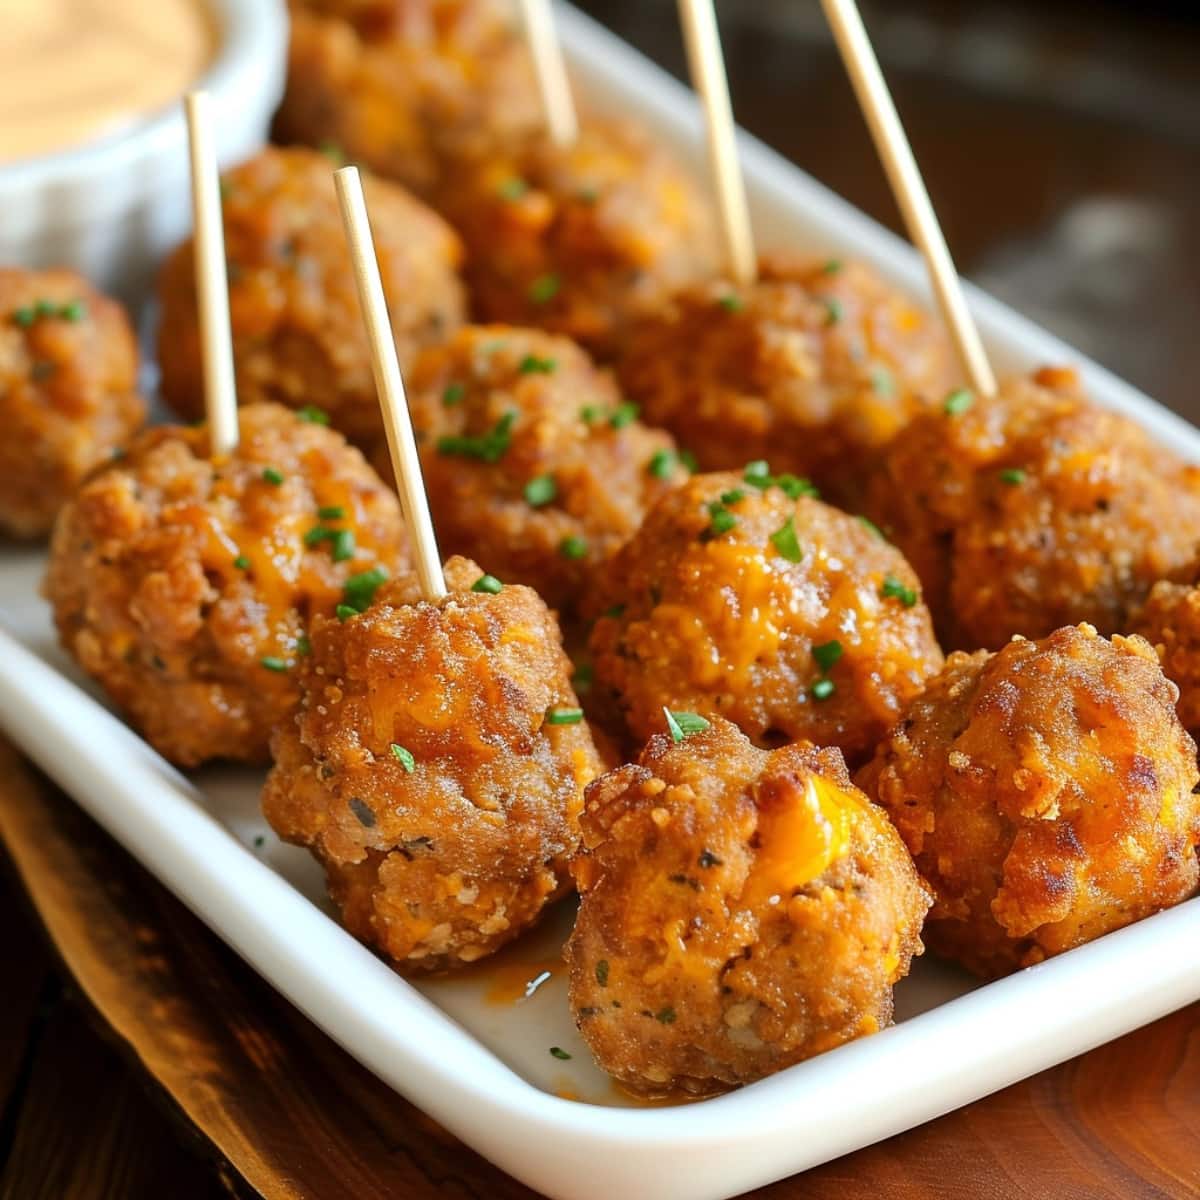 Cheesy homemade cheddar bay sausage balls on a wooden board